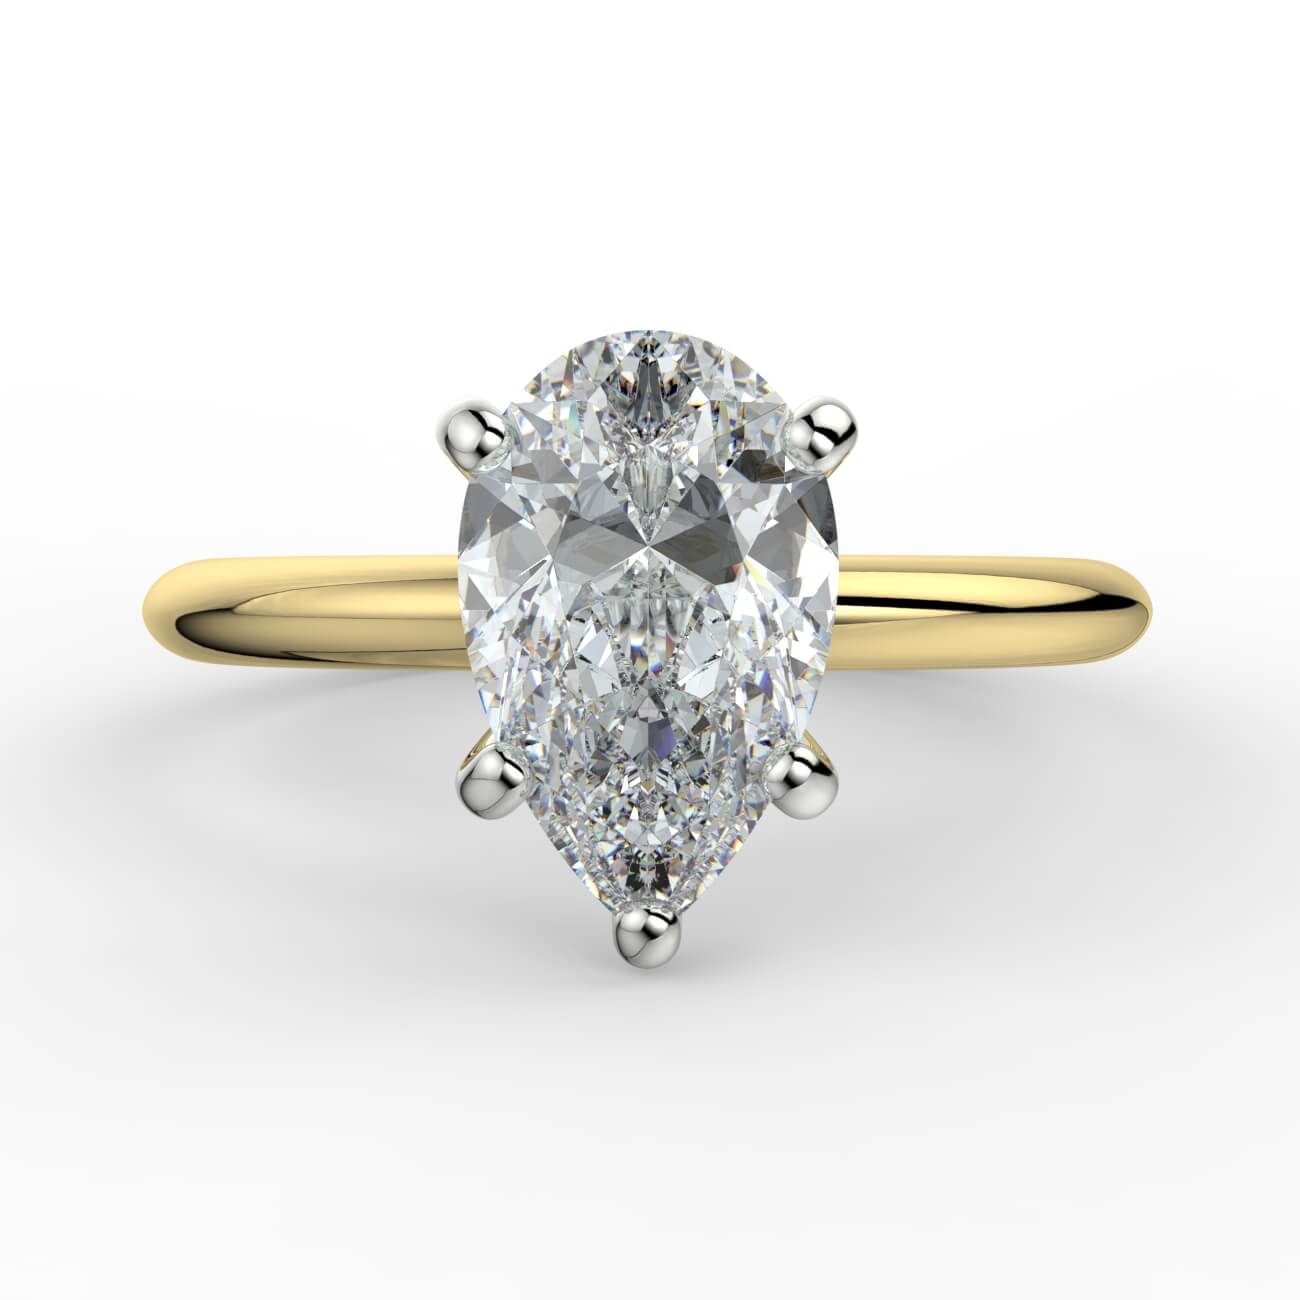 Solitaire pear shape diamond engagement ring in white and yellow gold – Australian Diamond Network